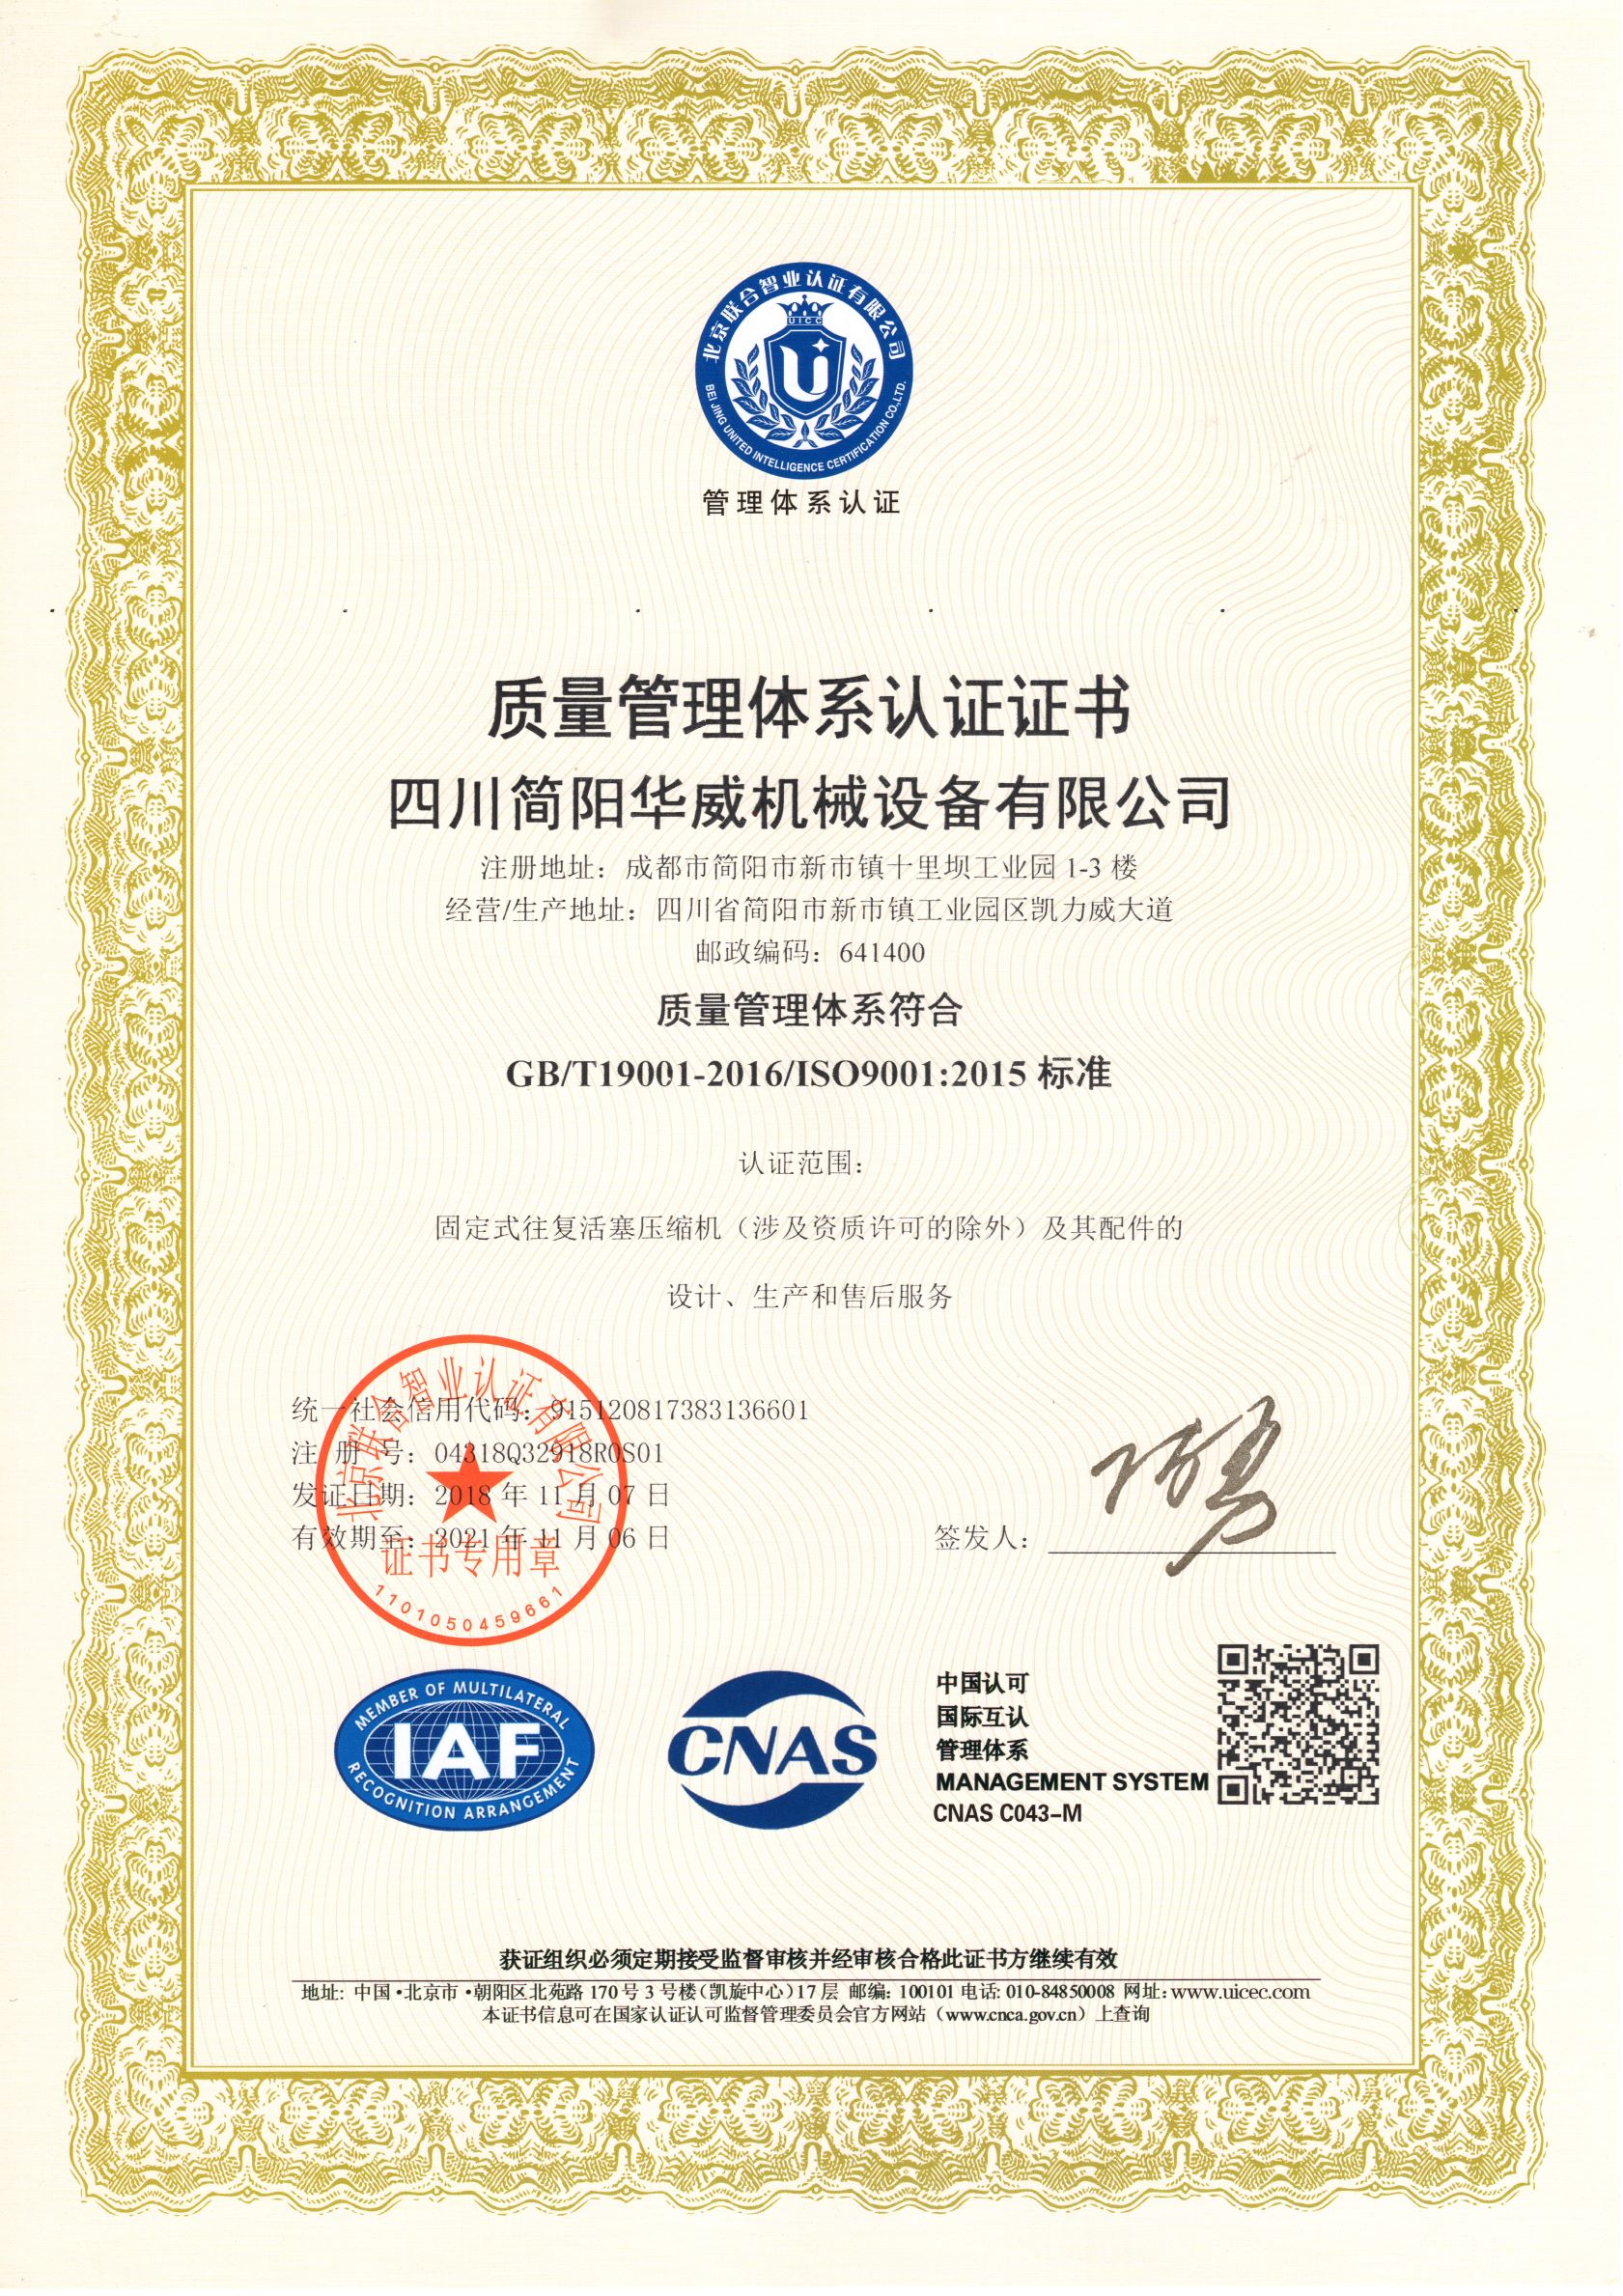 Quality management system certification-Chinese version